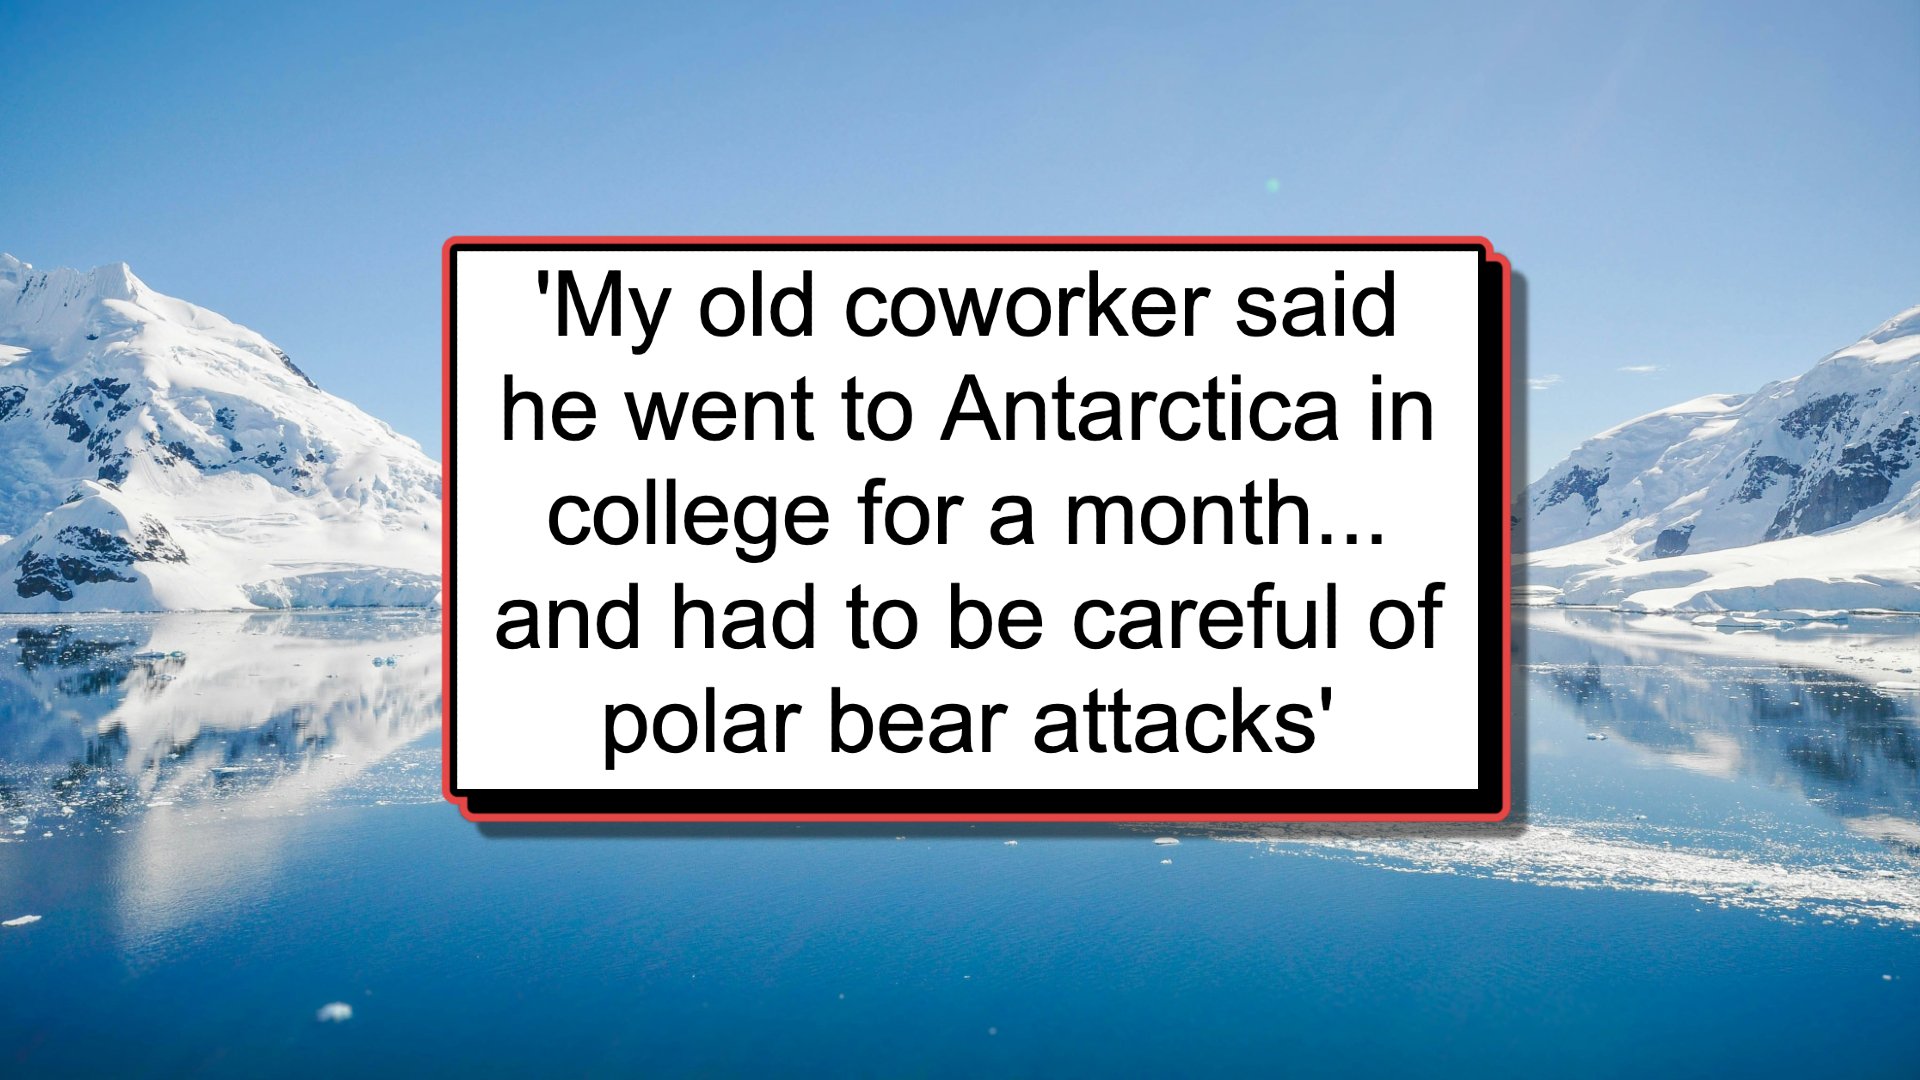 '[She] asked why we can't drive to Hawaii': 35 People who are totally misinformed